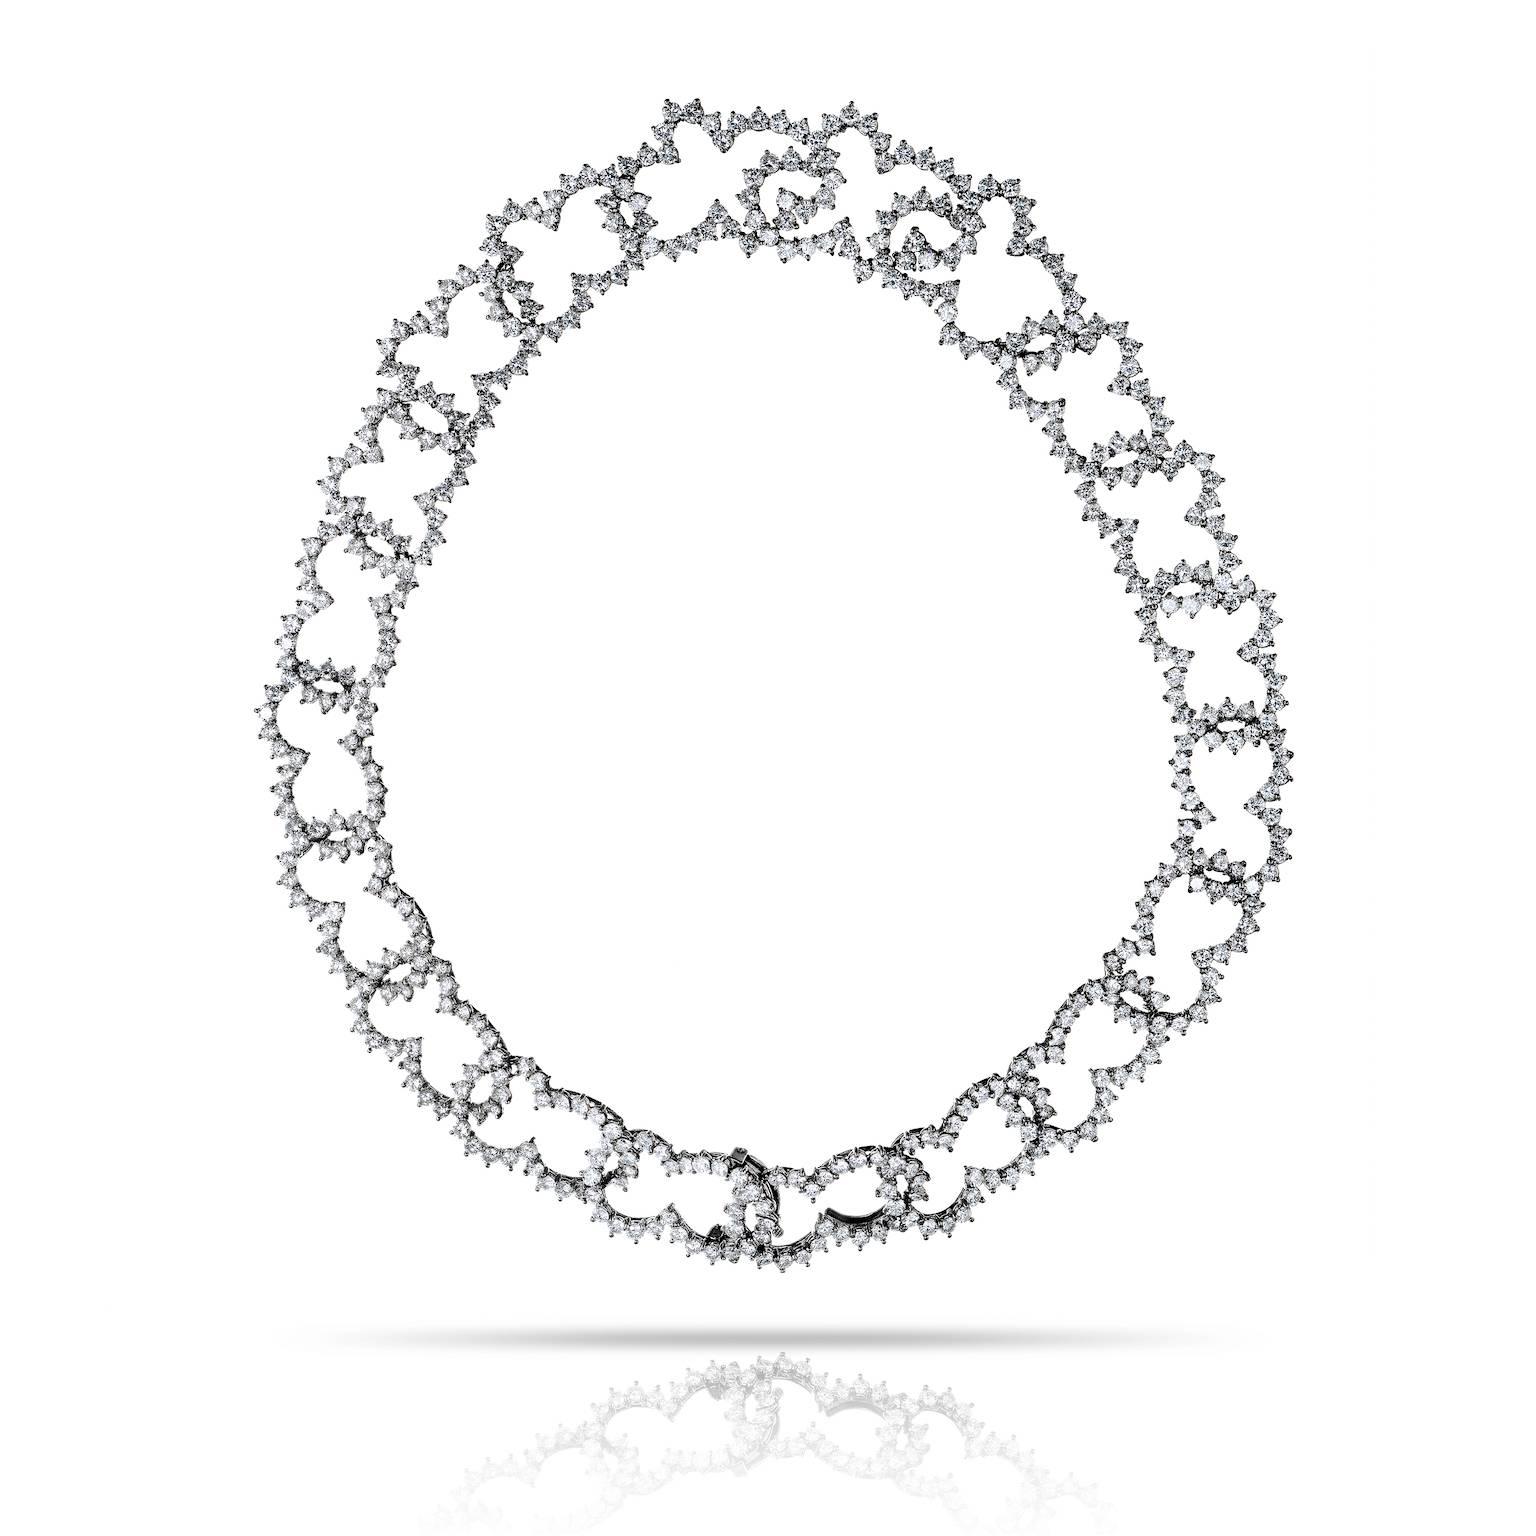 Angela Cummings Platinum Diamond Necklace and Bracelet Set

From Important Jewelry Collection: 
Angela Cummings Platinum Diamond Necklace and Bracelet Set

Platinum and Diamond Necklace and Bracelet, Angela Cummings
Composed of interlocking free